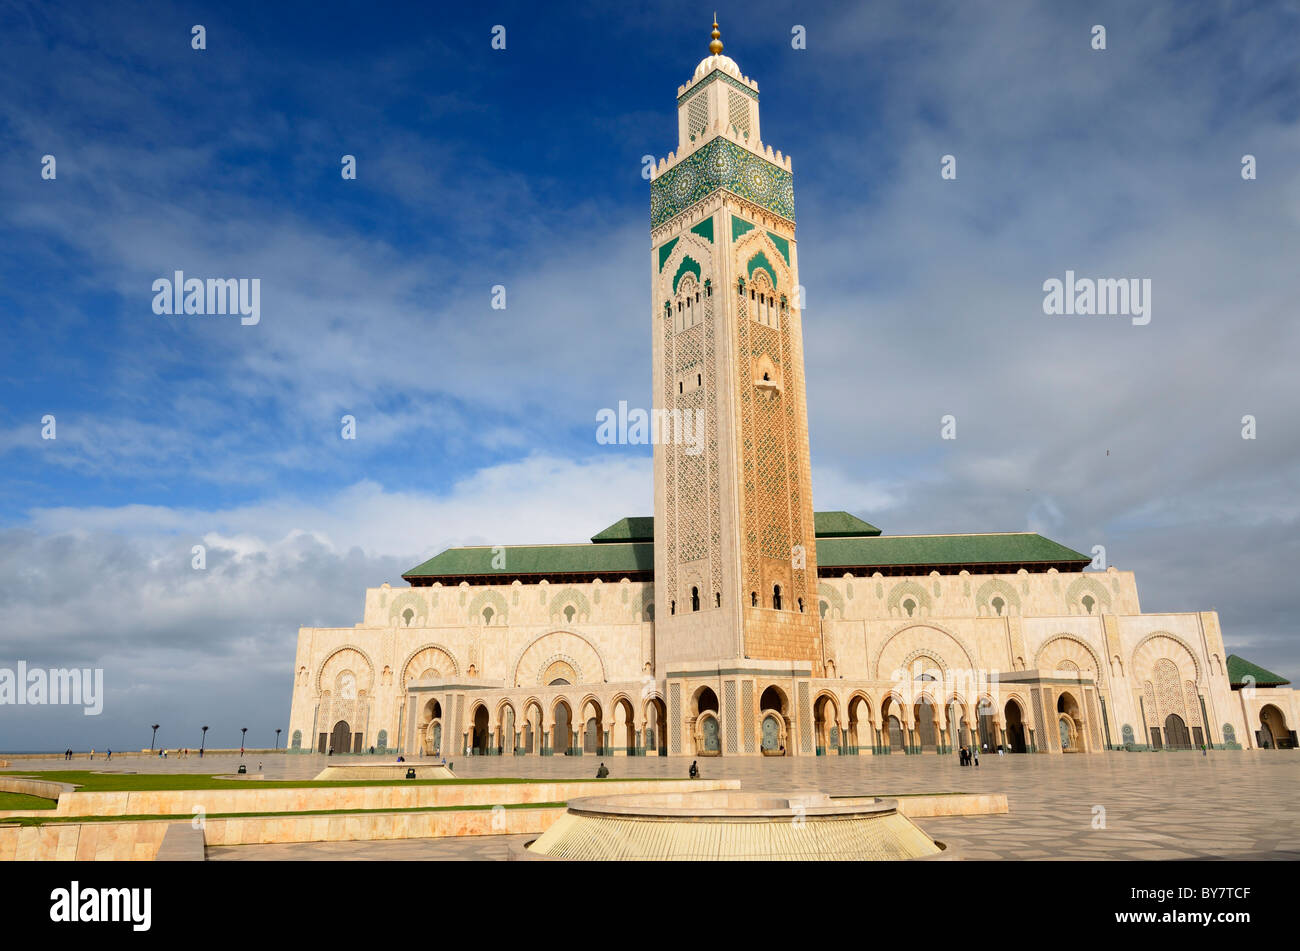 Huge Hassan II Mosque with worlds tallest minaret with Moorish architecture in Casablanca Morocco Stock Photo